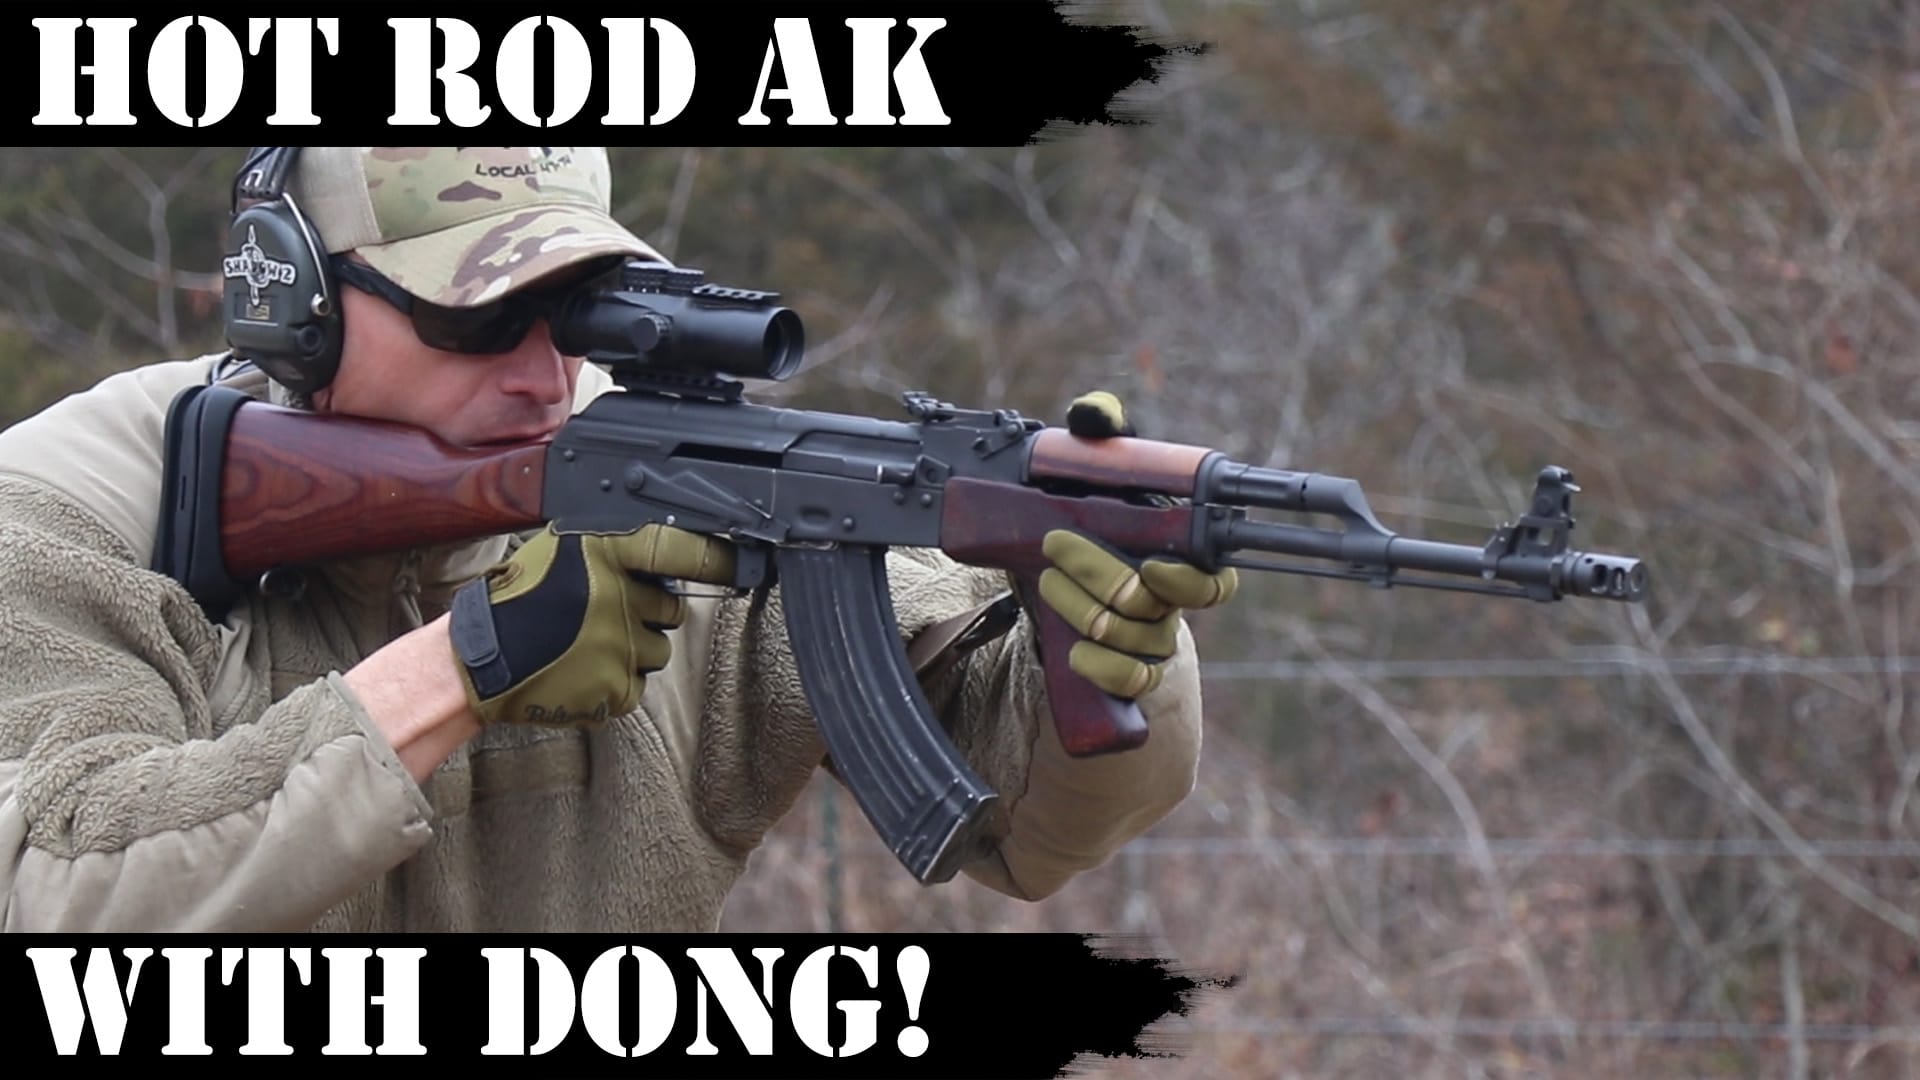 Hot Rod AK with Dong!